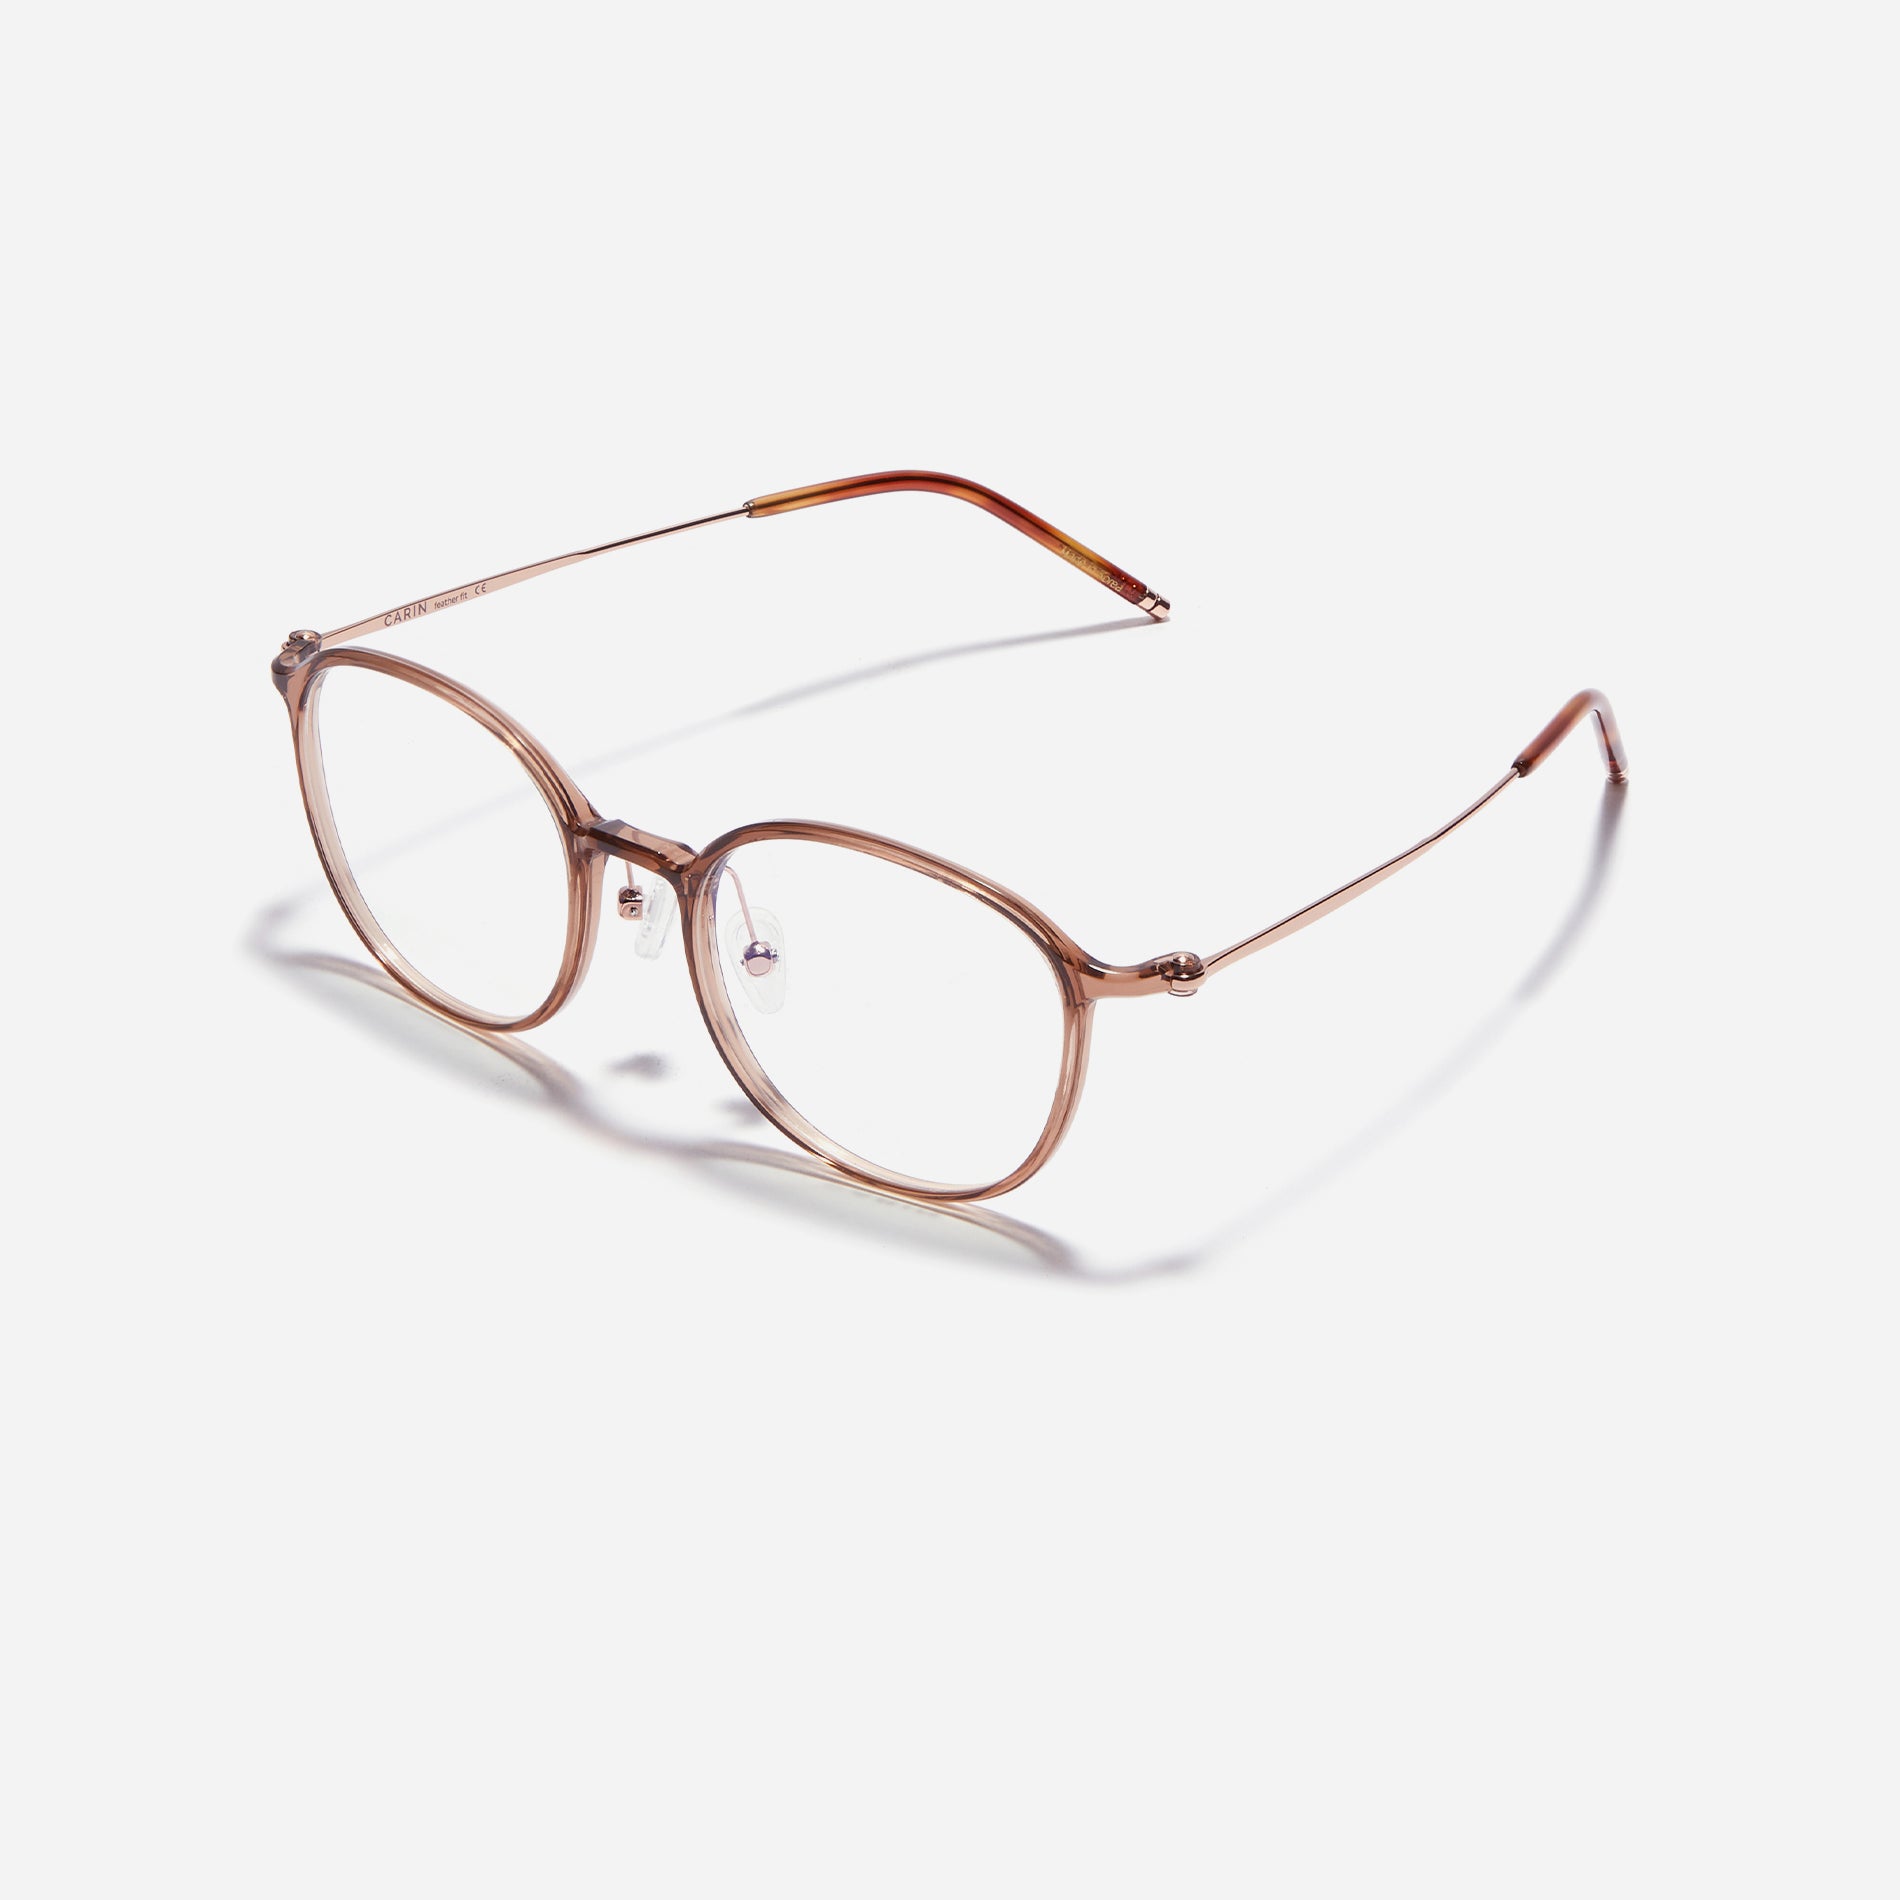 Ultra-lightweight round square-shaped eyeglasses crafted using cutting-edge materials sourced from the French company ARKEMA. These glasses offer robust durability and consistently comfortable fit.